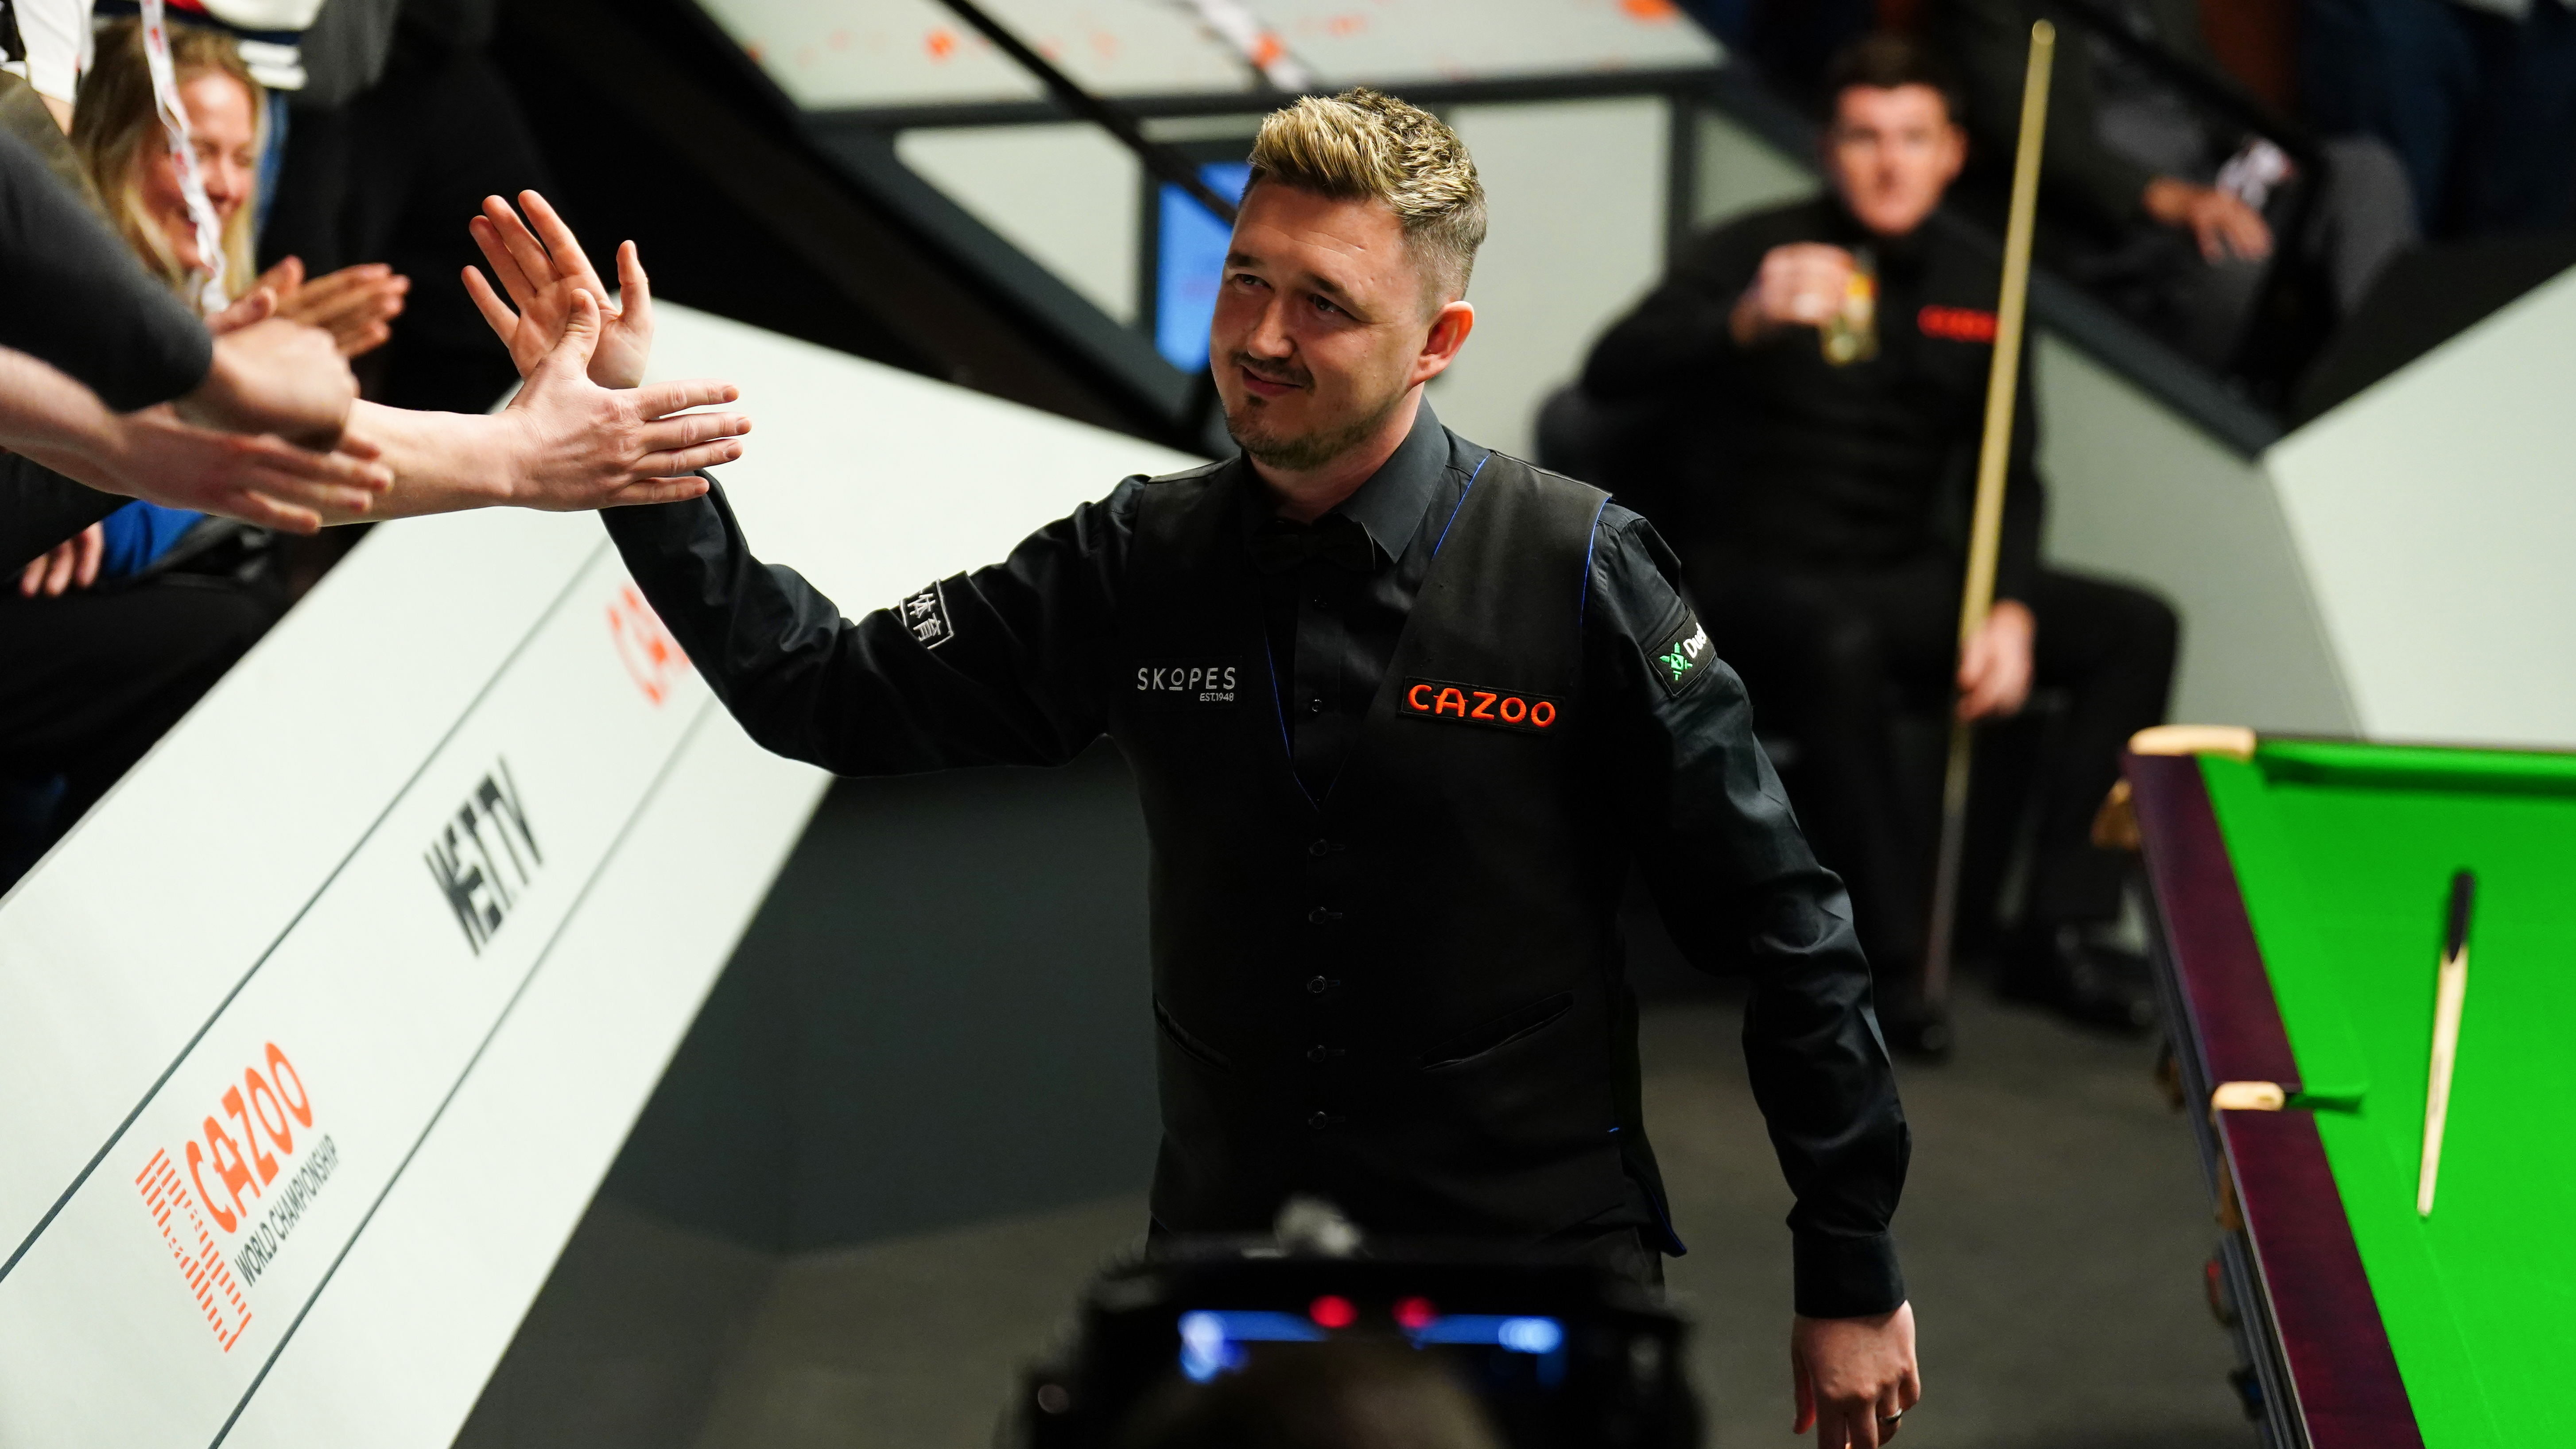 Kyren Wilson scores a 147 break at the World Snooker Championship, the 13th maximum in Crucible history